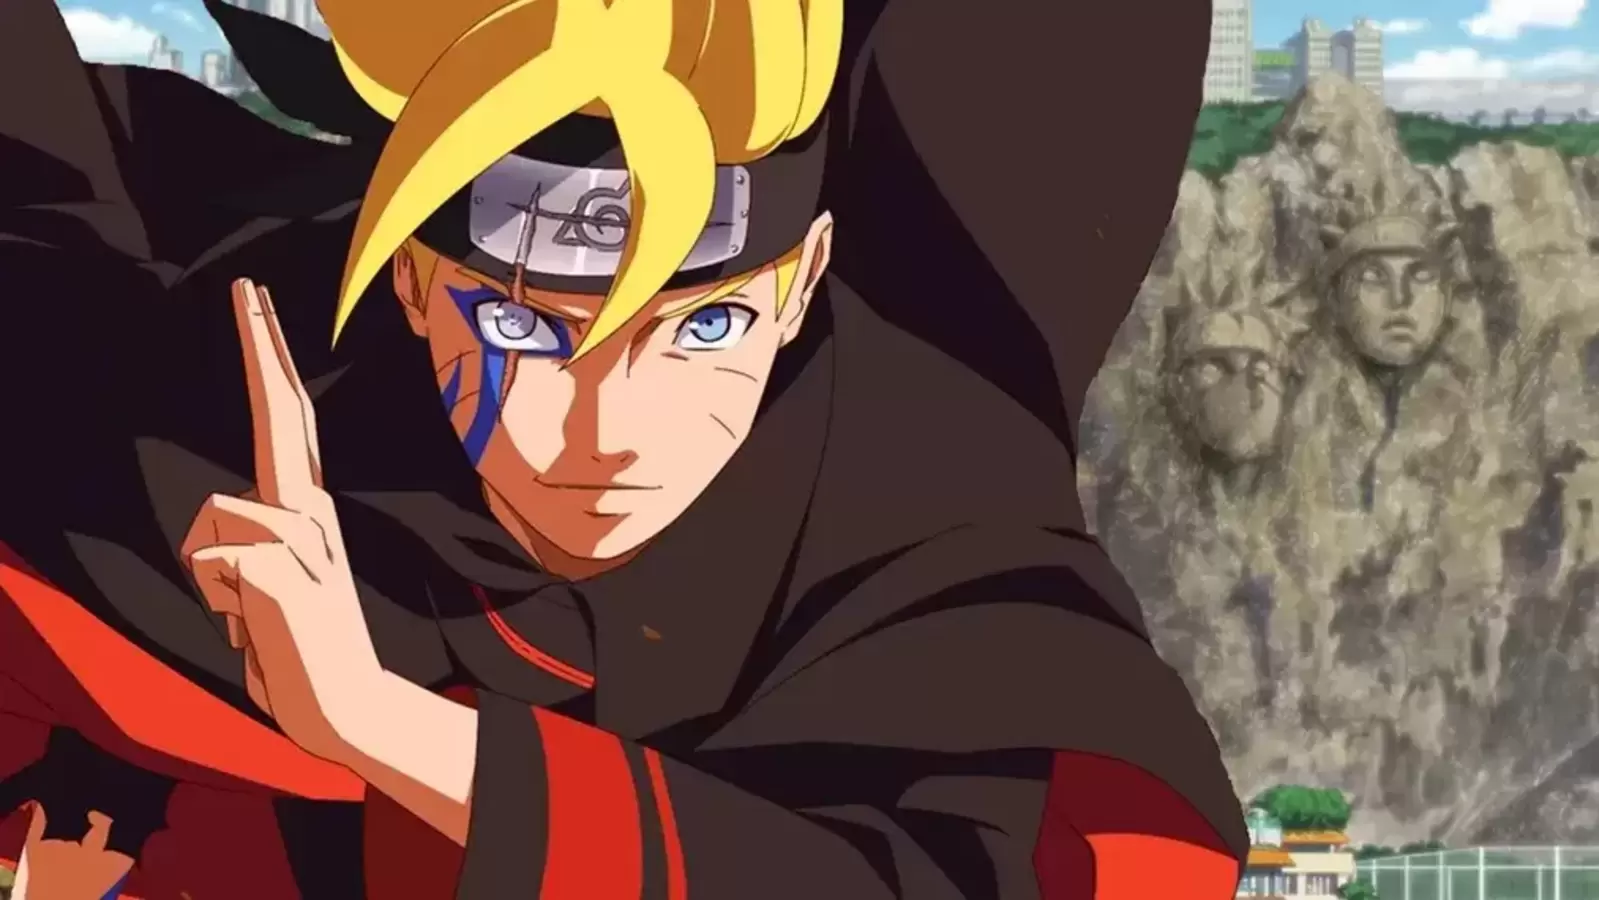 Latest Buzz What's Next for 'Boruto' in Episode 294 and Beyond - Fans Await Eagerly